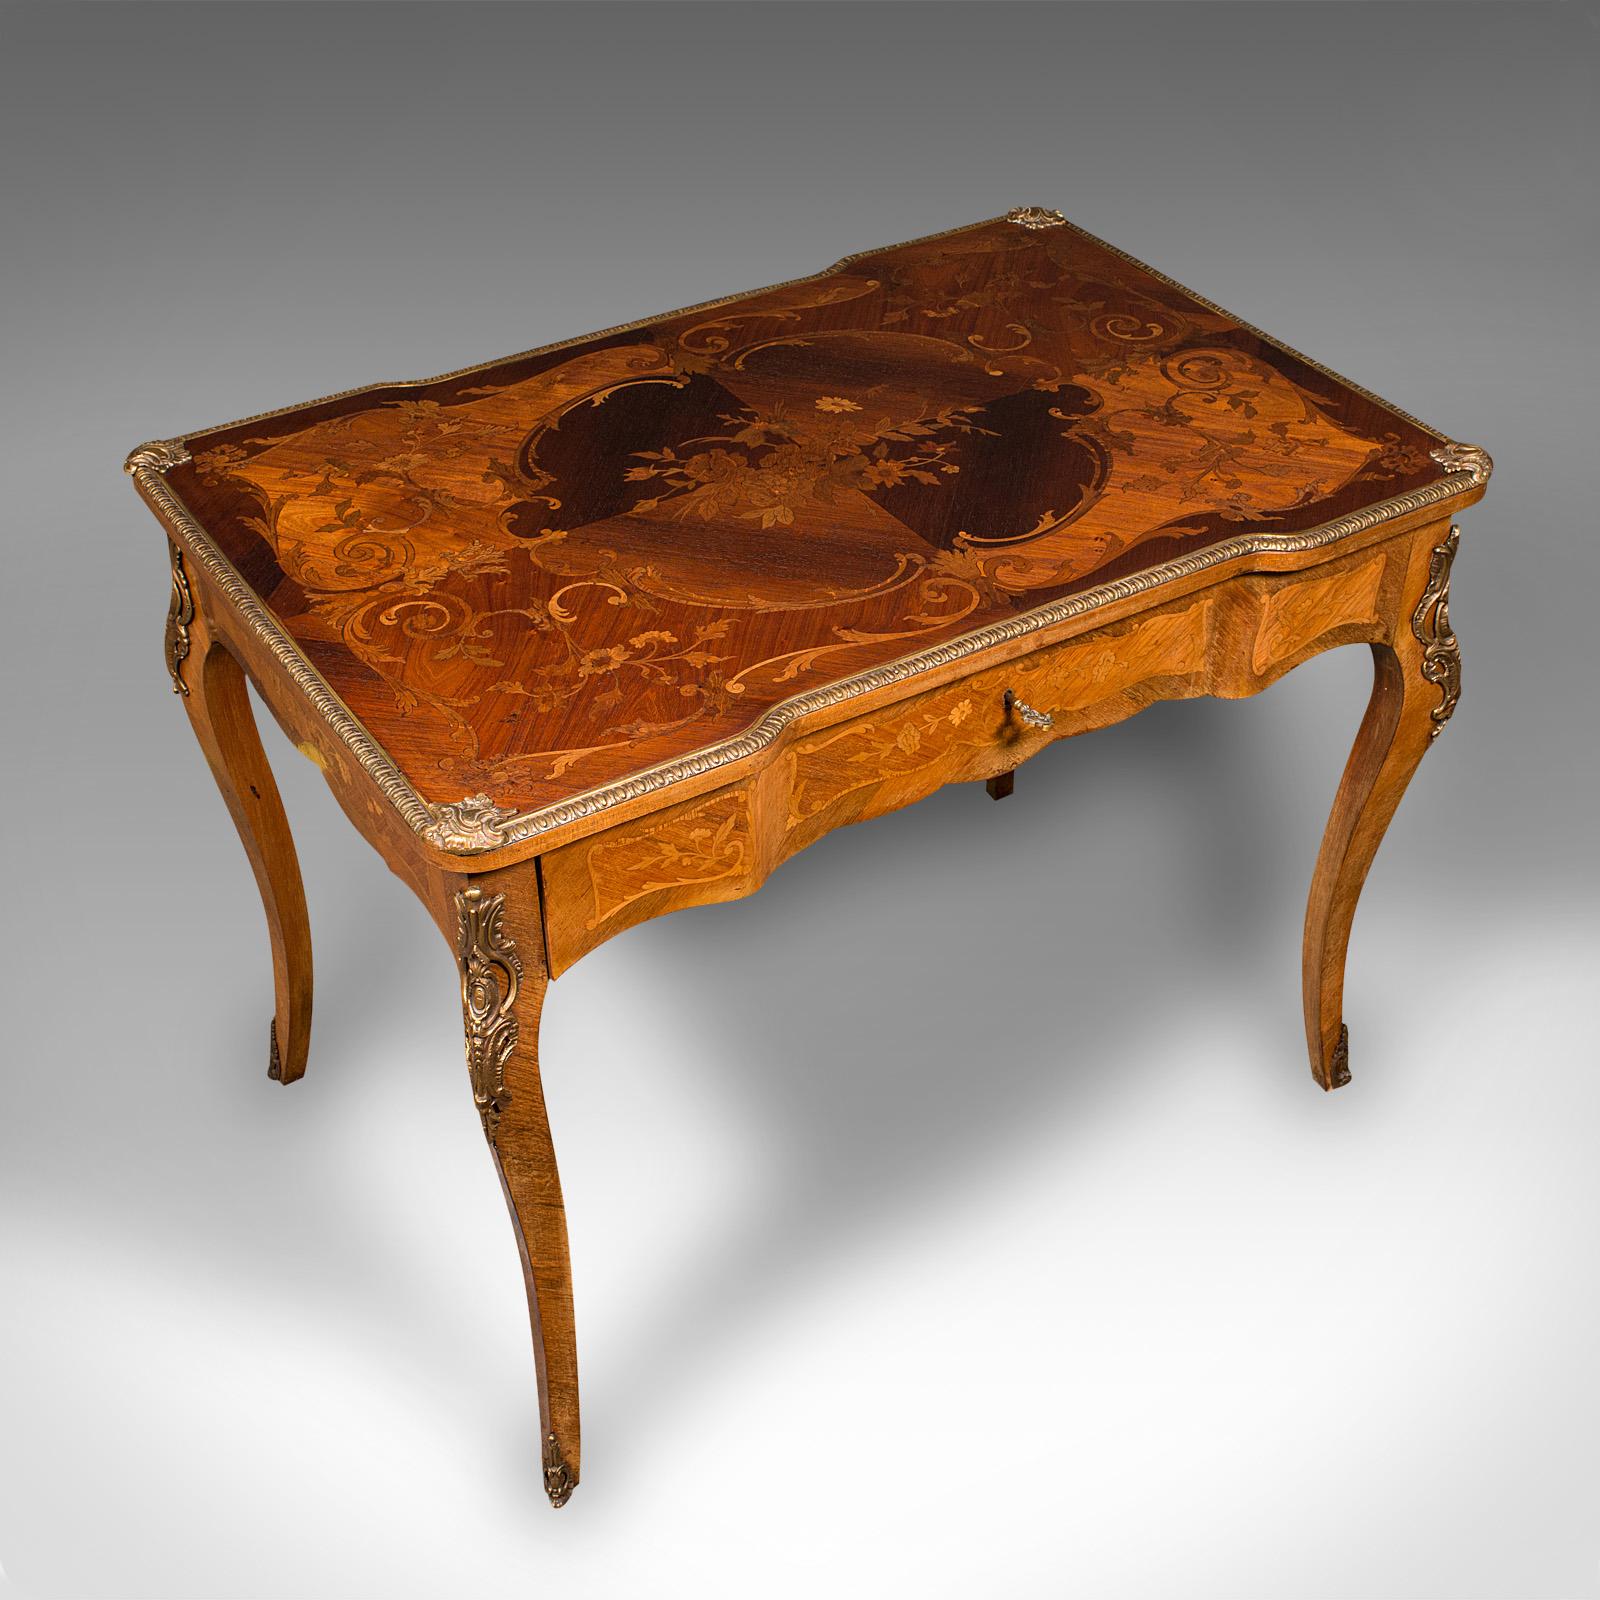 Wood Antique Writing Desk, French, Decorative Centre Table, Louis XV Taste, Victorian For Sale